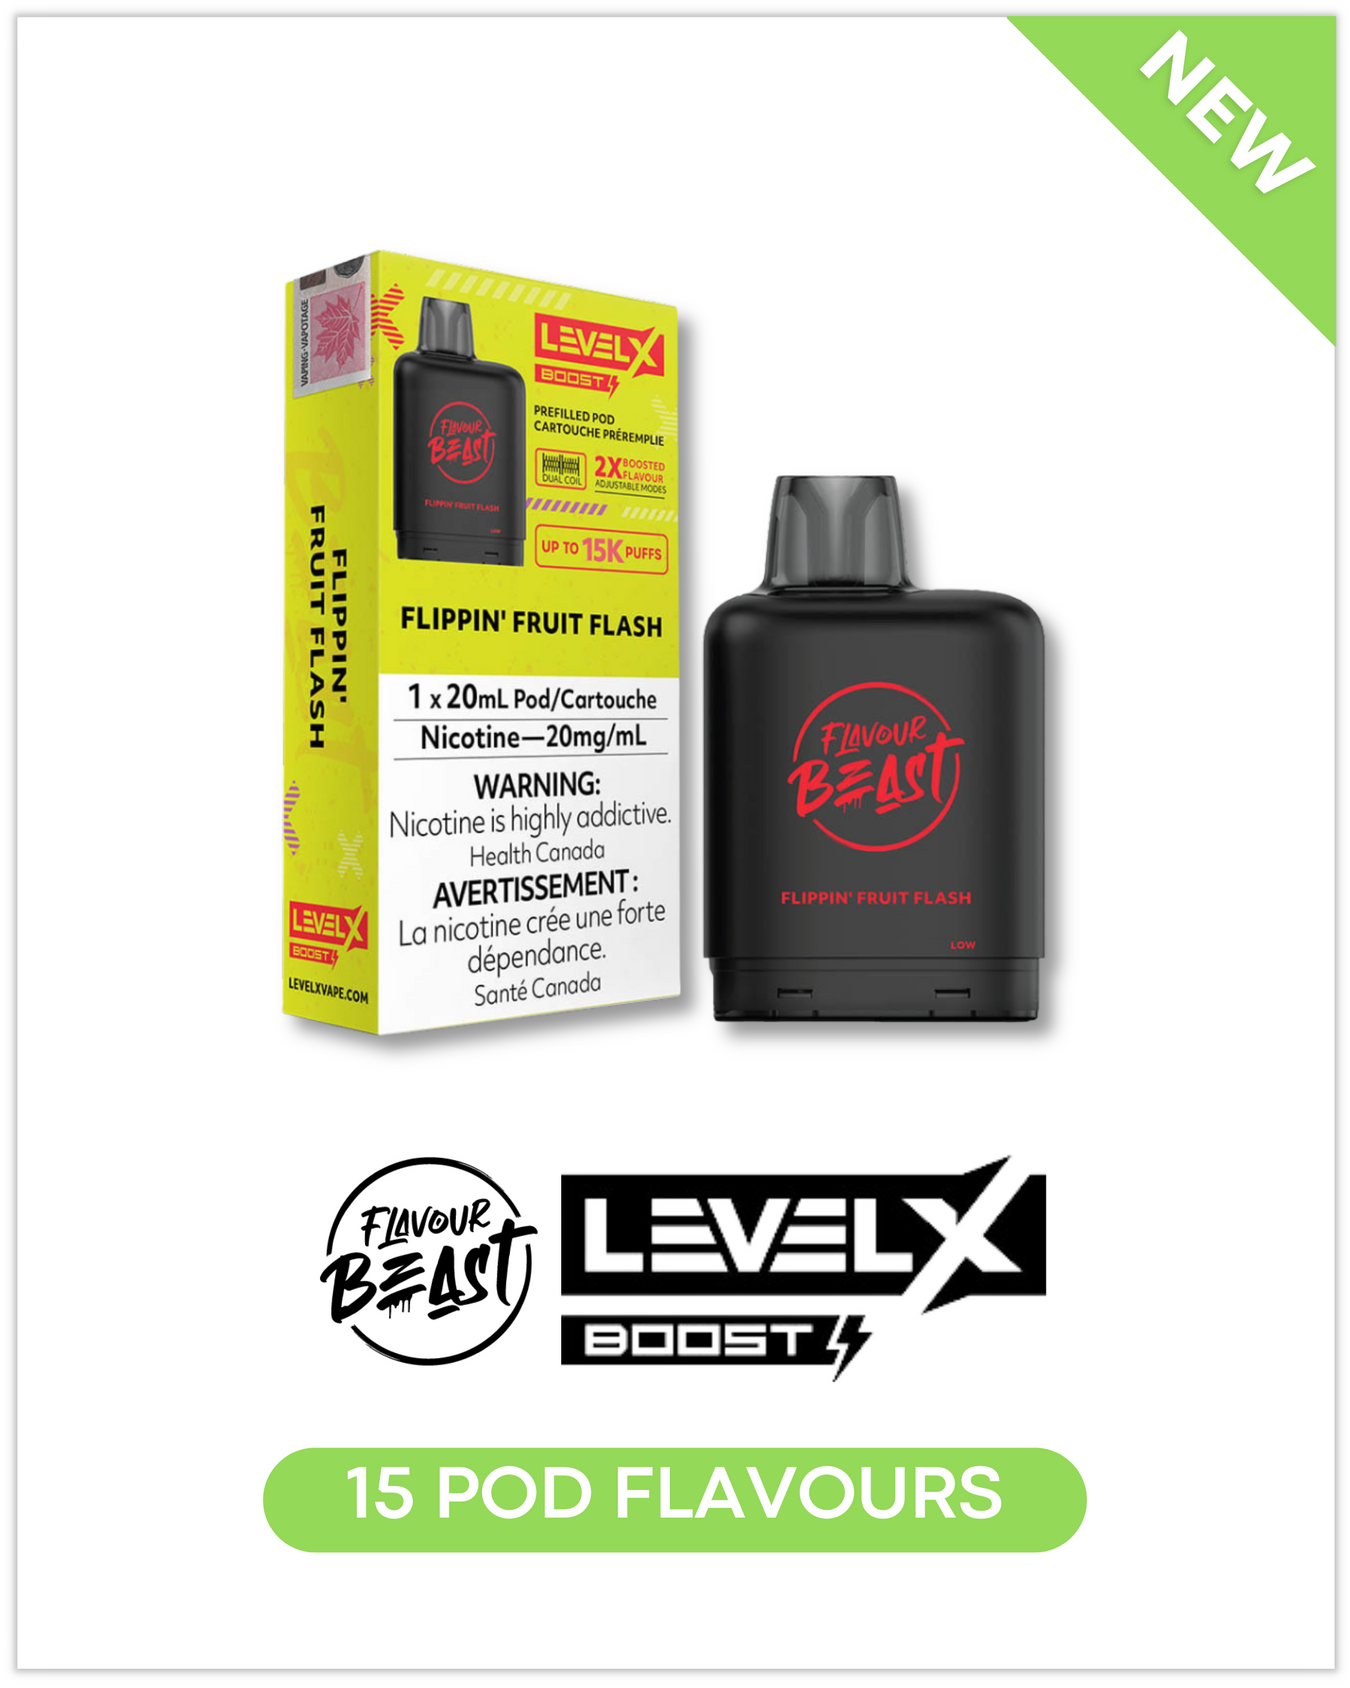 Level X Flavour Beast Boost Pods